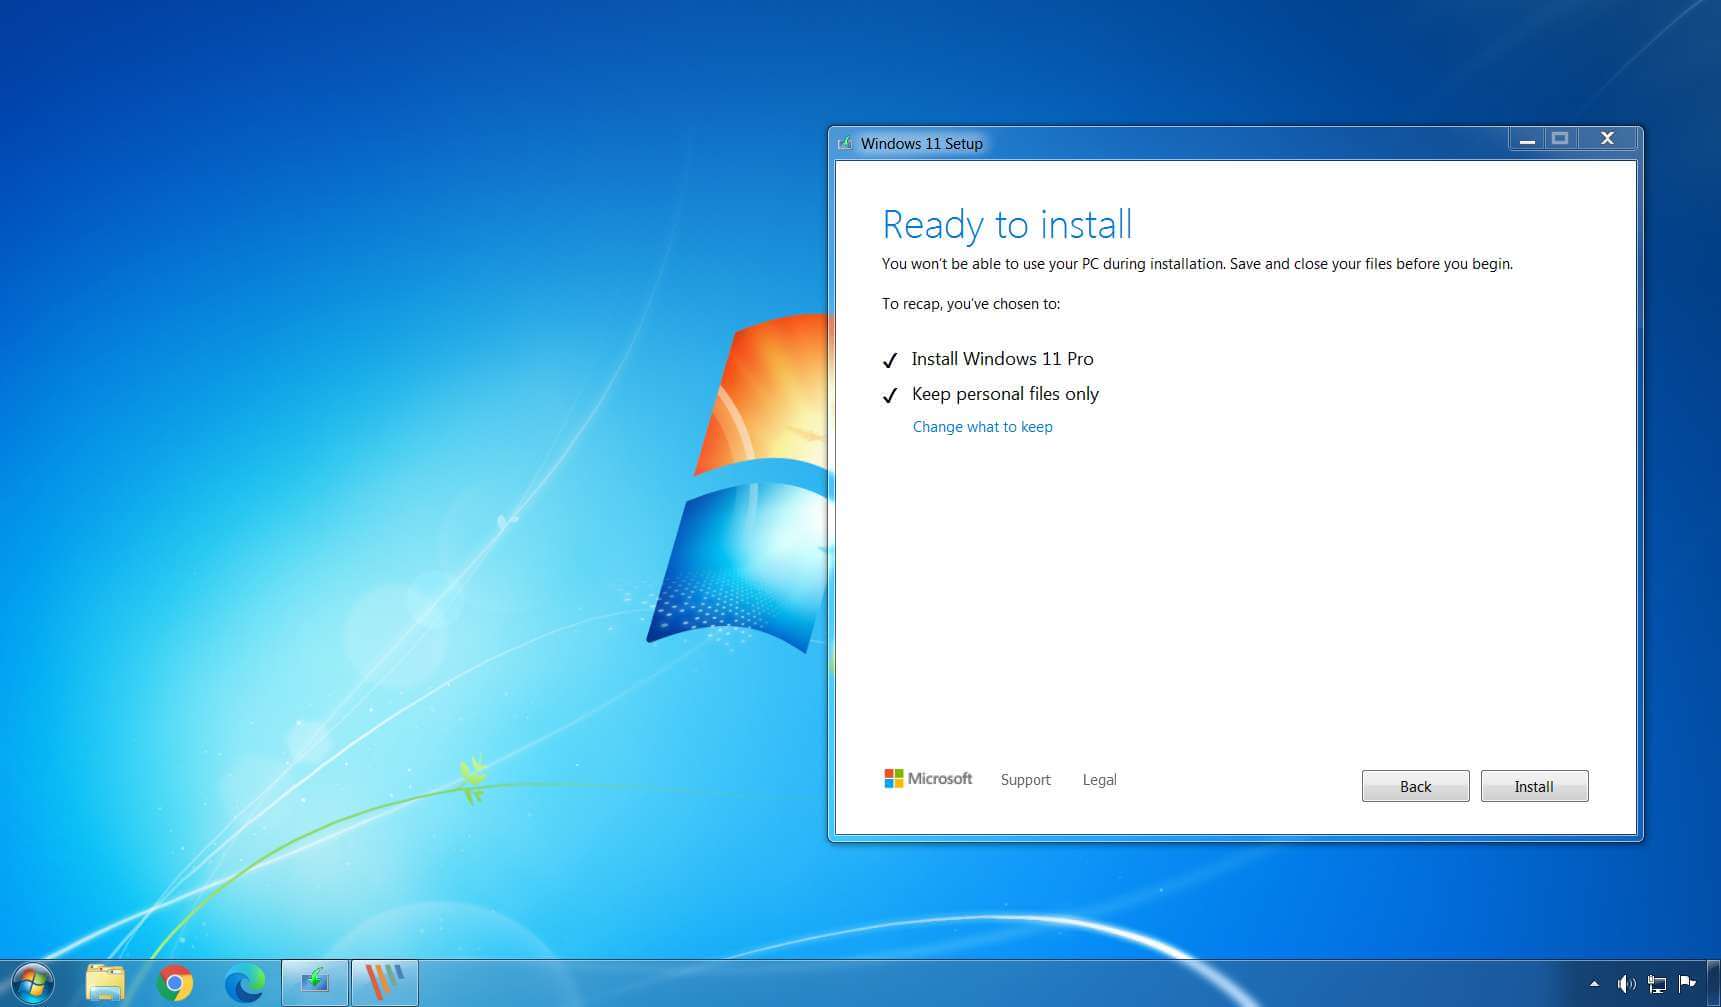 How to install Windows 7 in Windows 11?